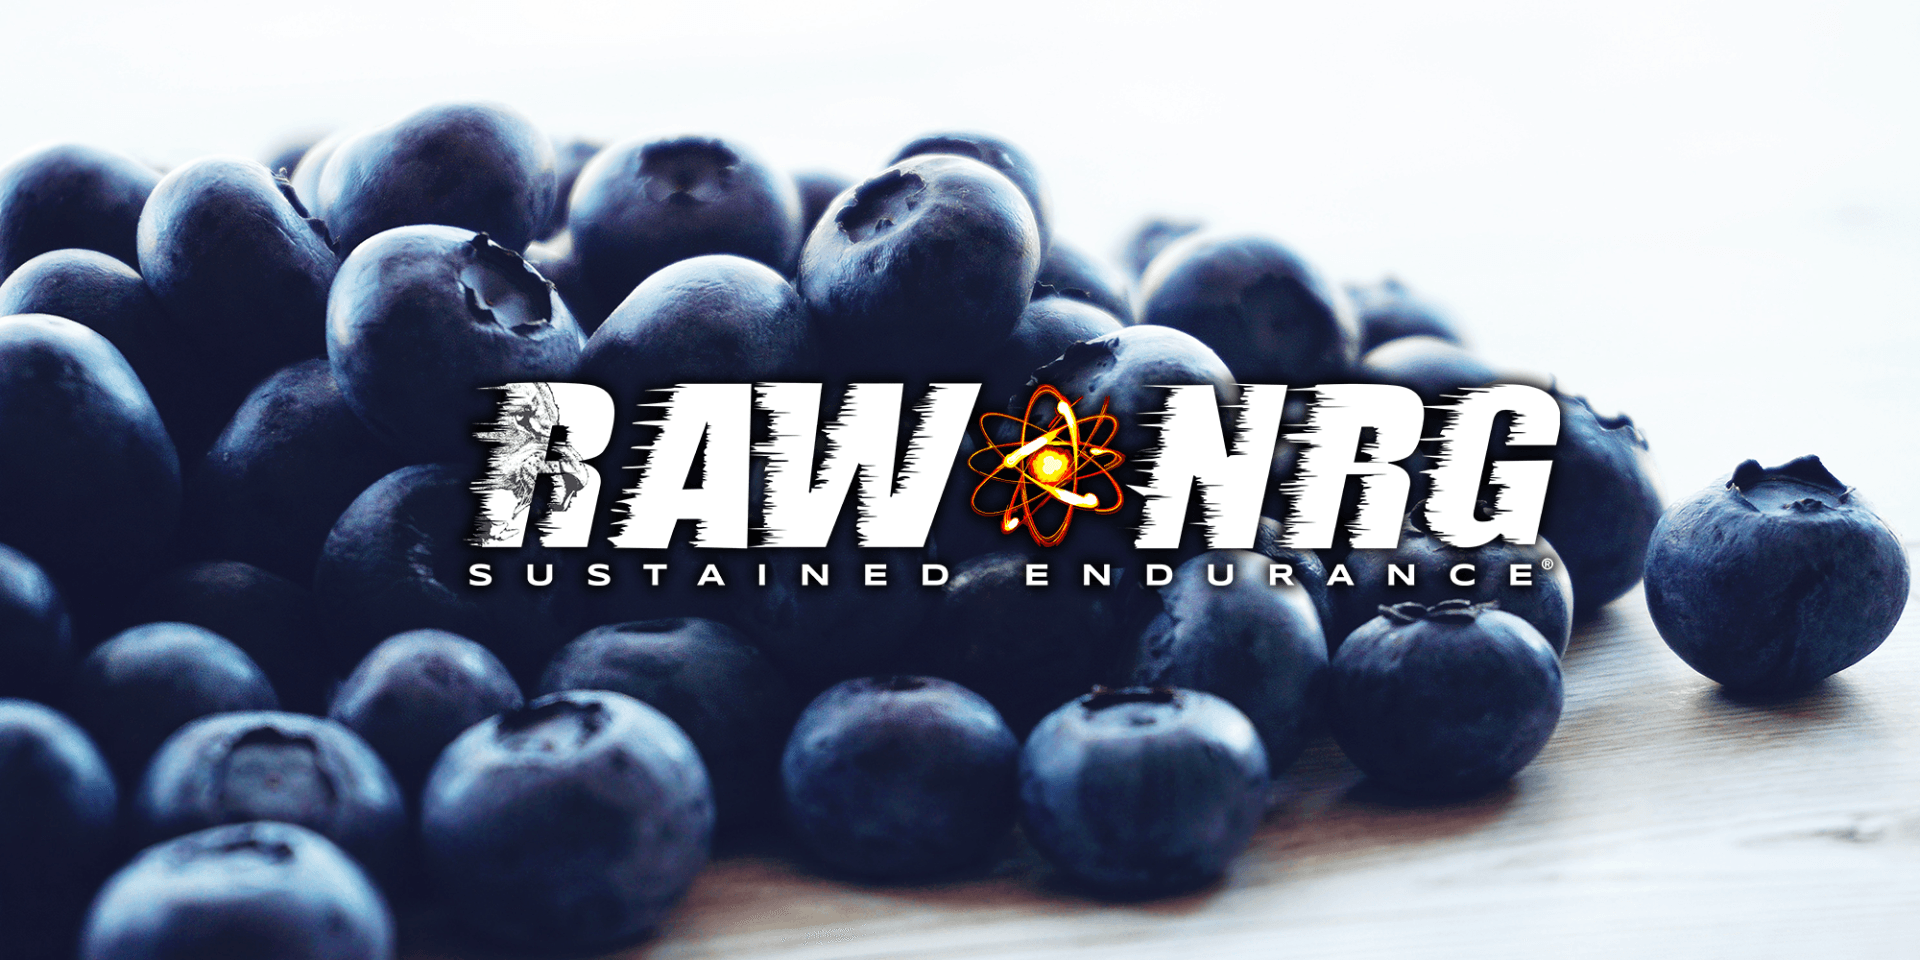 RAW NRG - The worlds best nutrition bar